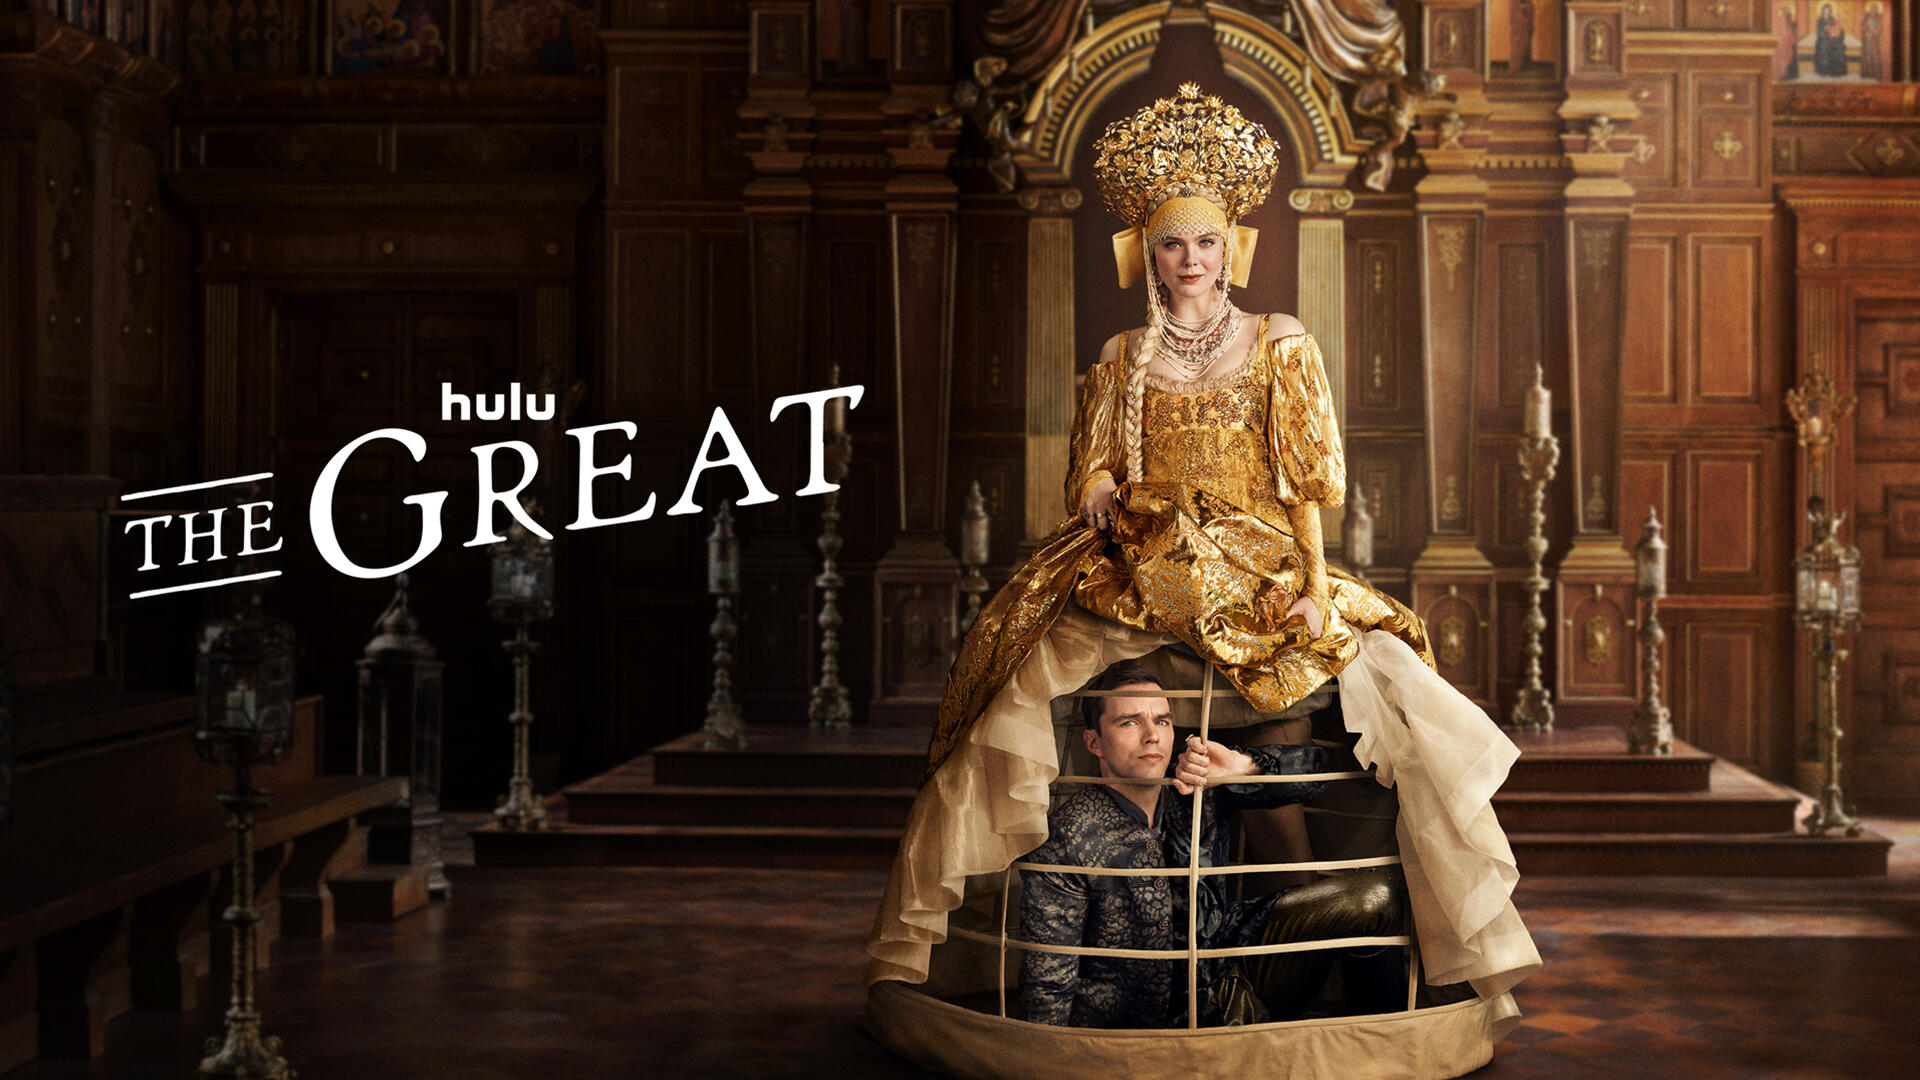 The Great -- In season two of “The Great,” Catherine finally takes the Russian throne for her own — but if she thought coup-ing her husband was difficult, it’s nothing compared to the realities of ‘liberating' a country that doesn’t want to be. She’ll battle her court, her team, even her own mother in a bid to bring the enlightenment to Russia. Meanwhile she’ll also battle her heart as Peter slowly transitions from much-hated husband, to prisoner? Ally? Lover? Ultimately Catherine will learn that to change a country, you must let it change you, that there is a fine line between idealism and delusion, and that becoming 'Great', will ask more of her than she could have imagined. Catherine (Elle Fanning) and Peter (Nicholas Hoult), shown. (Courtesy of Hulu)